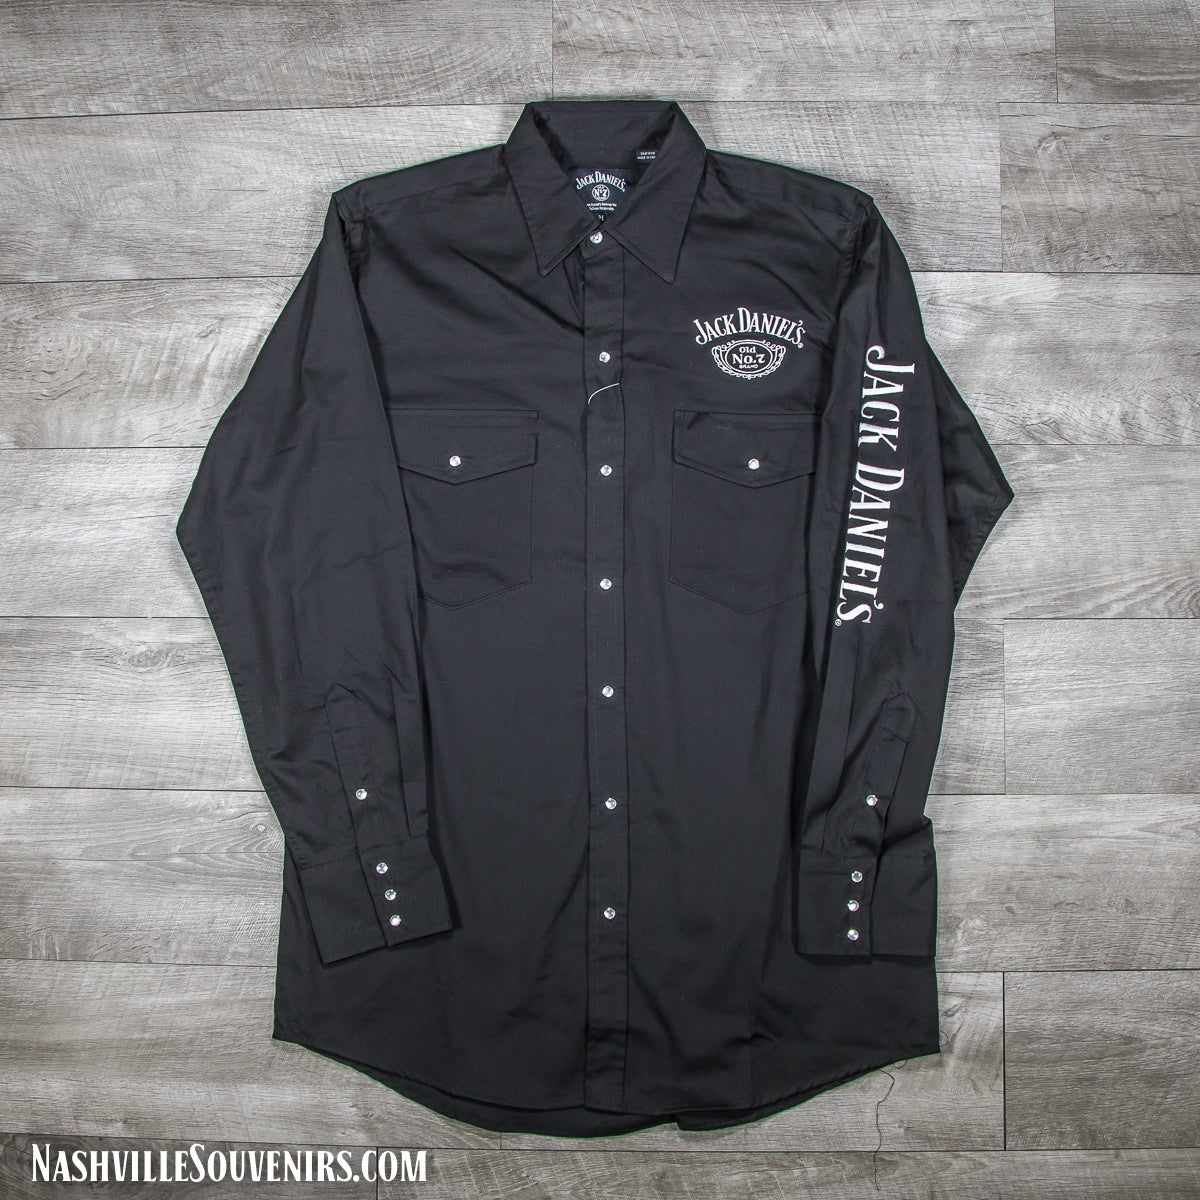 Jack Daniels Officially licensed Black Western Rodeo Shirt with embroidered Jack Daniels logo on a black shirt with snap closures.  Get yours with FREE SHIPPING on all US orders over $75!